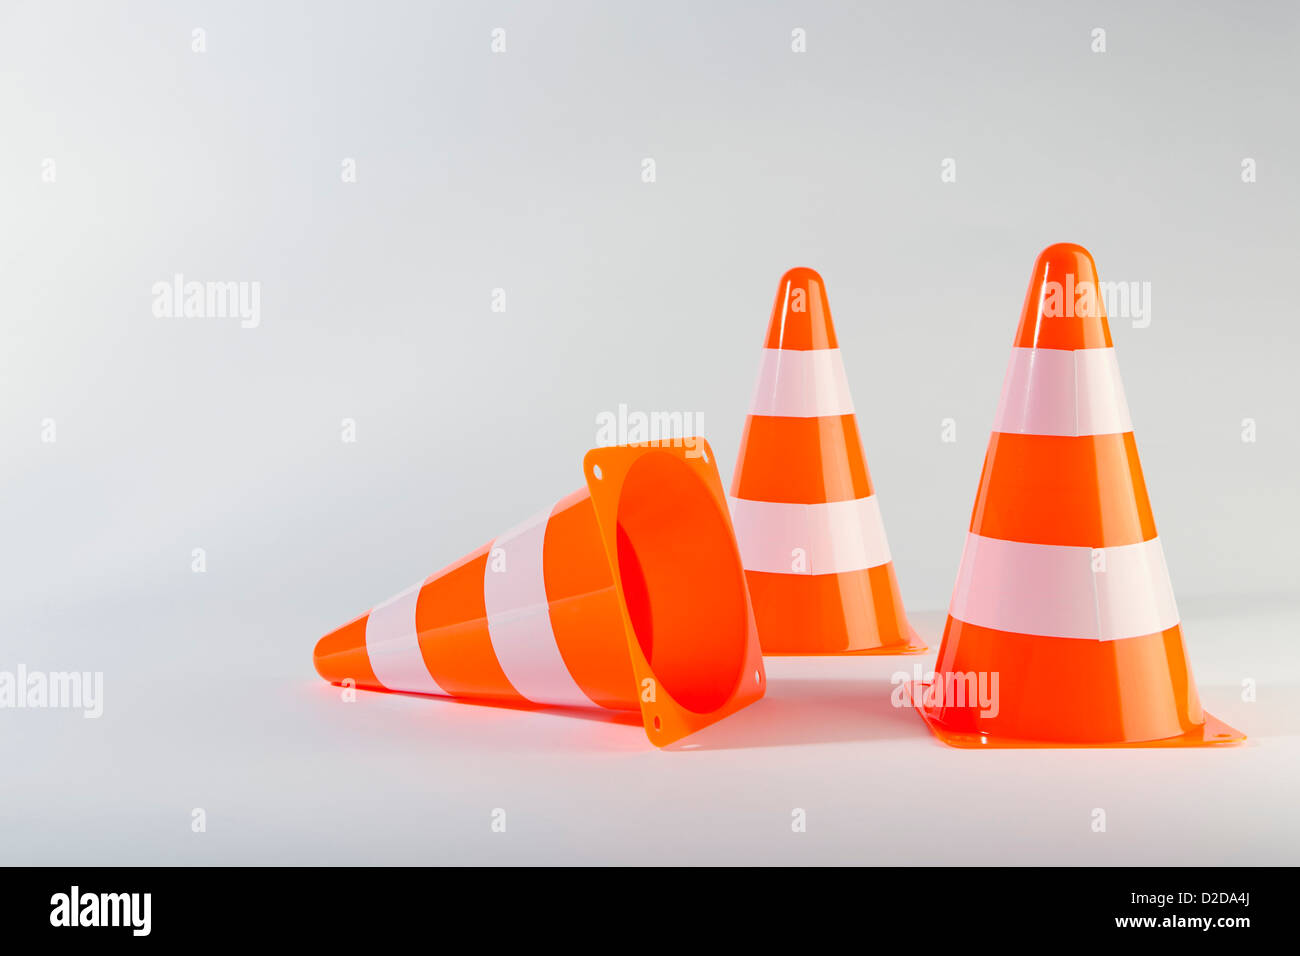 A traffic cone lying on its side next to two standing traffic cones Stock Photo